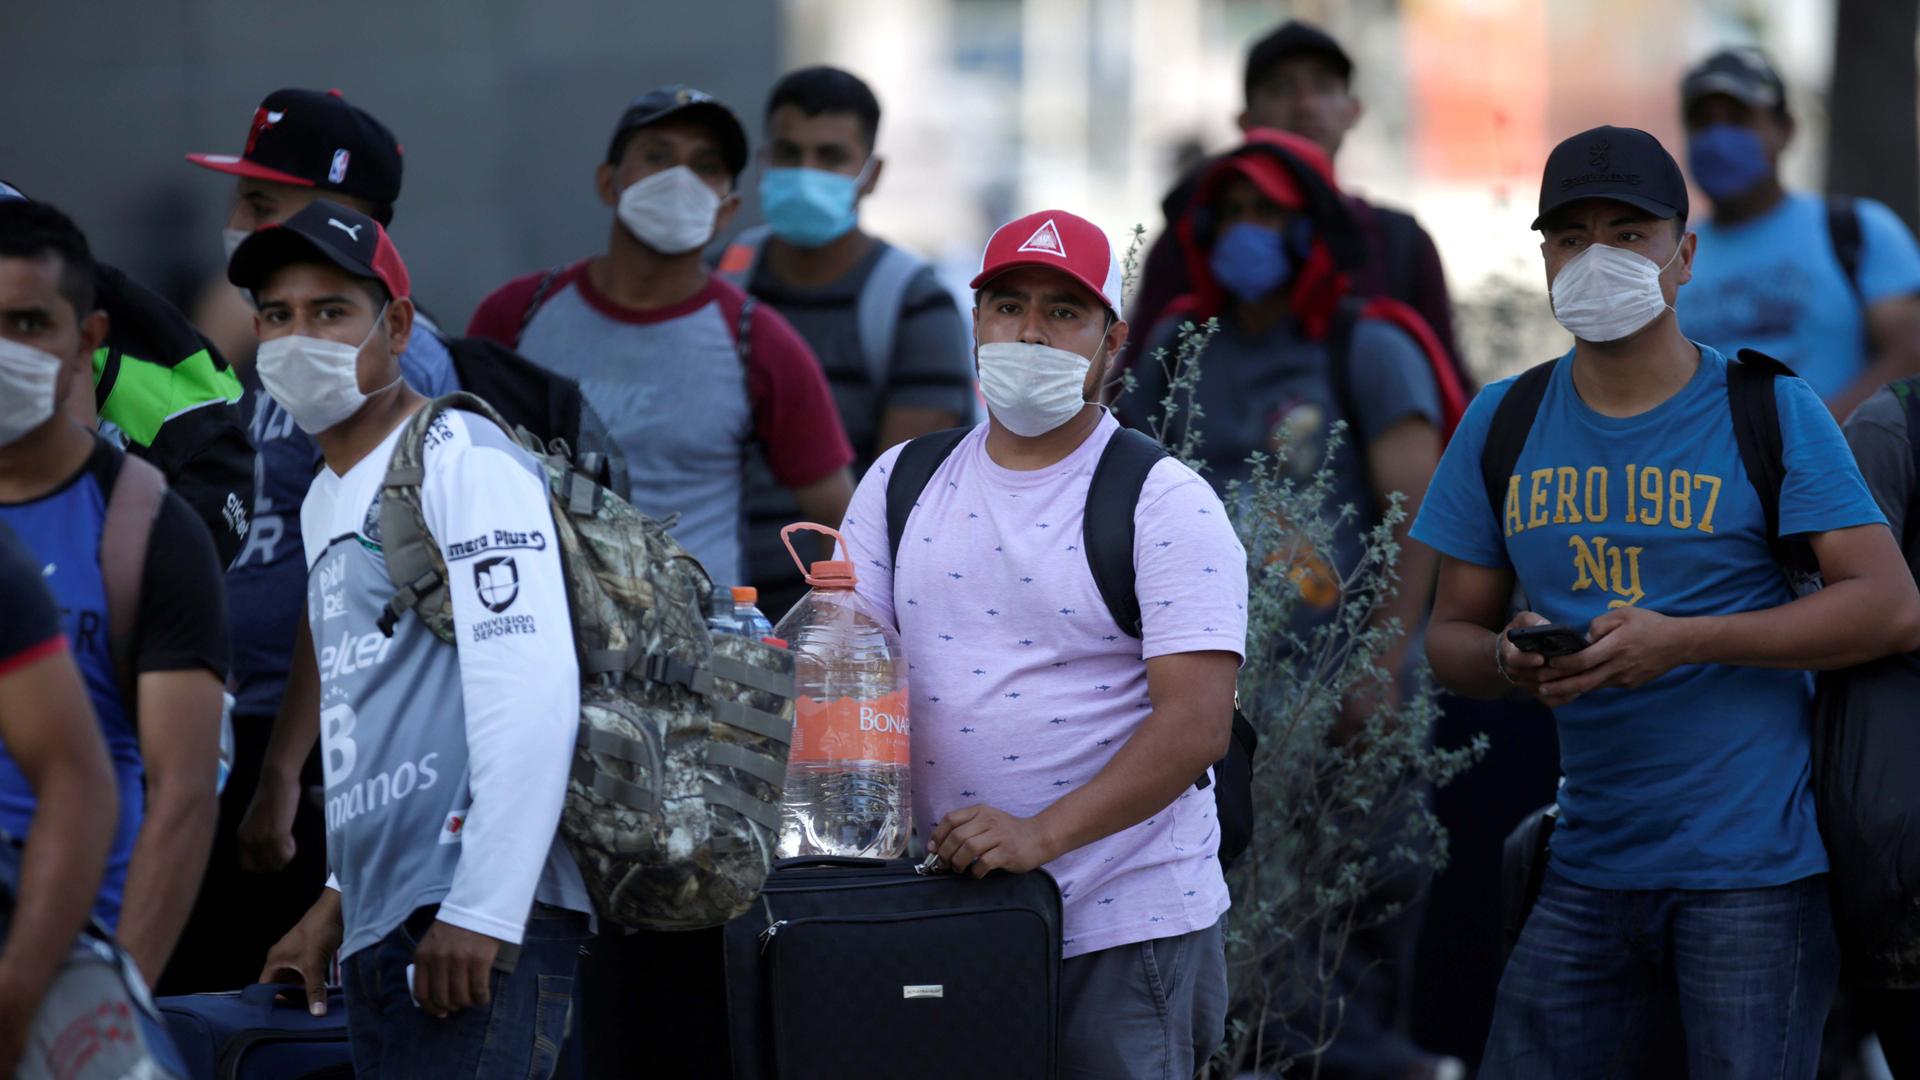 Migrants seeking for a U.S. work visa are pictured after being evicted from their hotel, which local authorities said was crowded, as part of the measures to prevent the spreading of the coronavirus disease (COVID-19), in Monterrey, Mexico March 24, 2020.